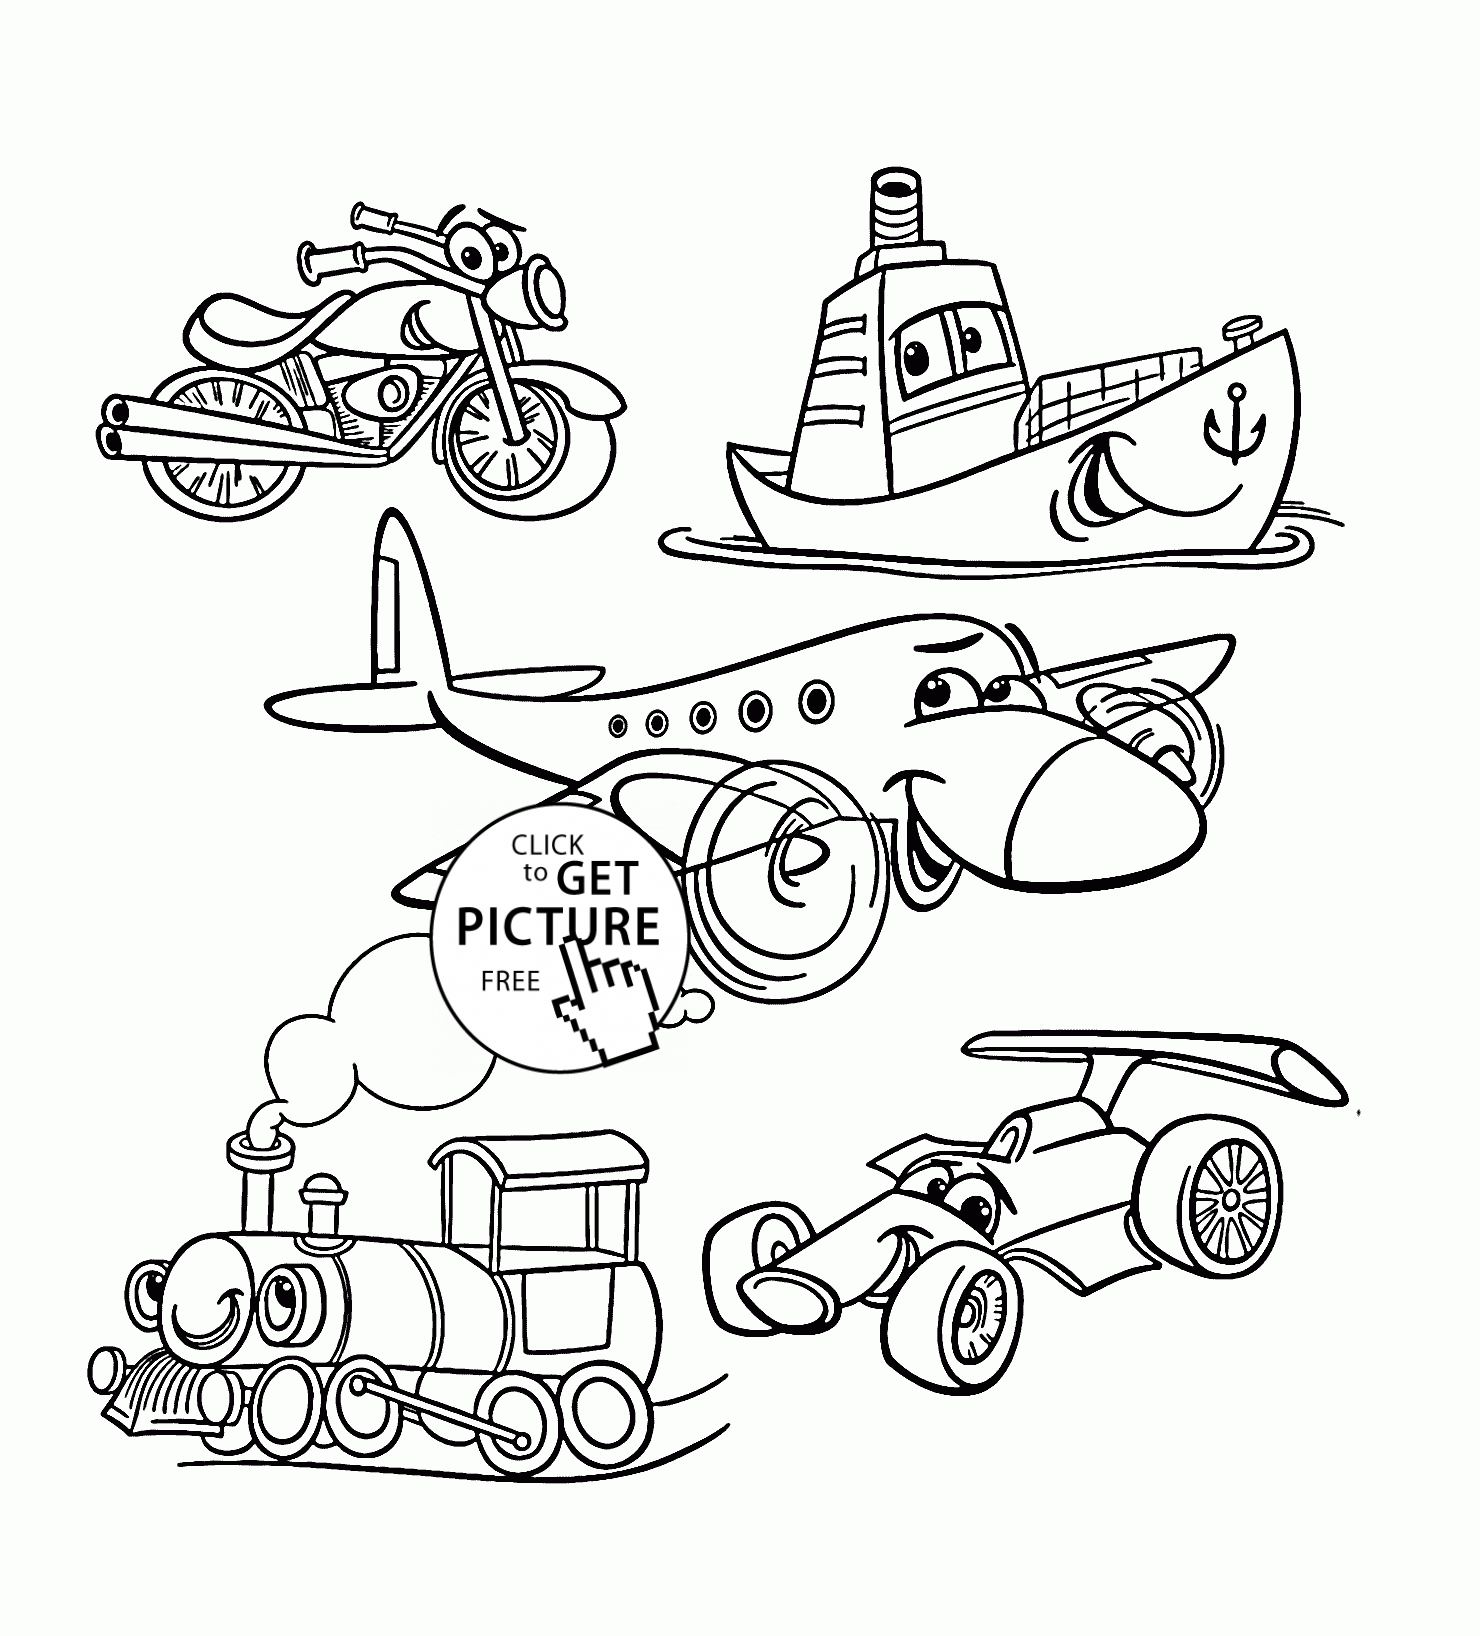 transportation coloring pages for kids transportation coloring page for toddlers coloring pages pages transportation for coloring kids 